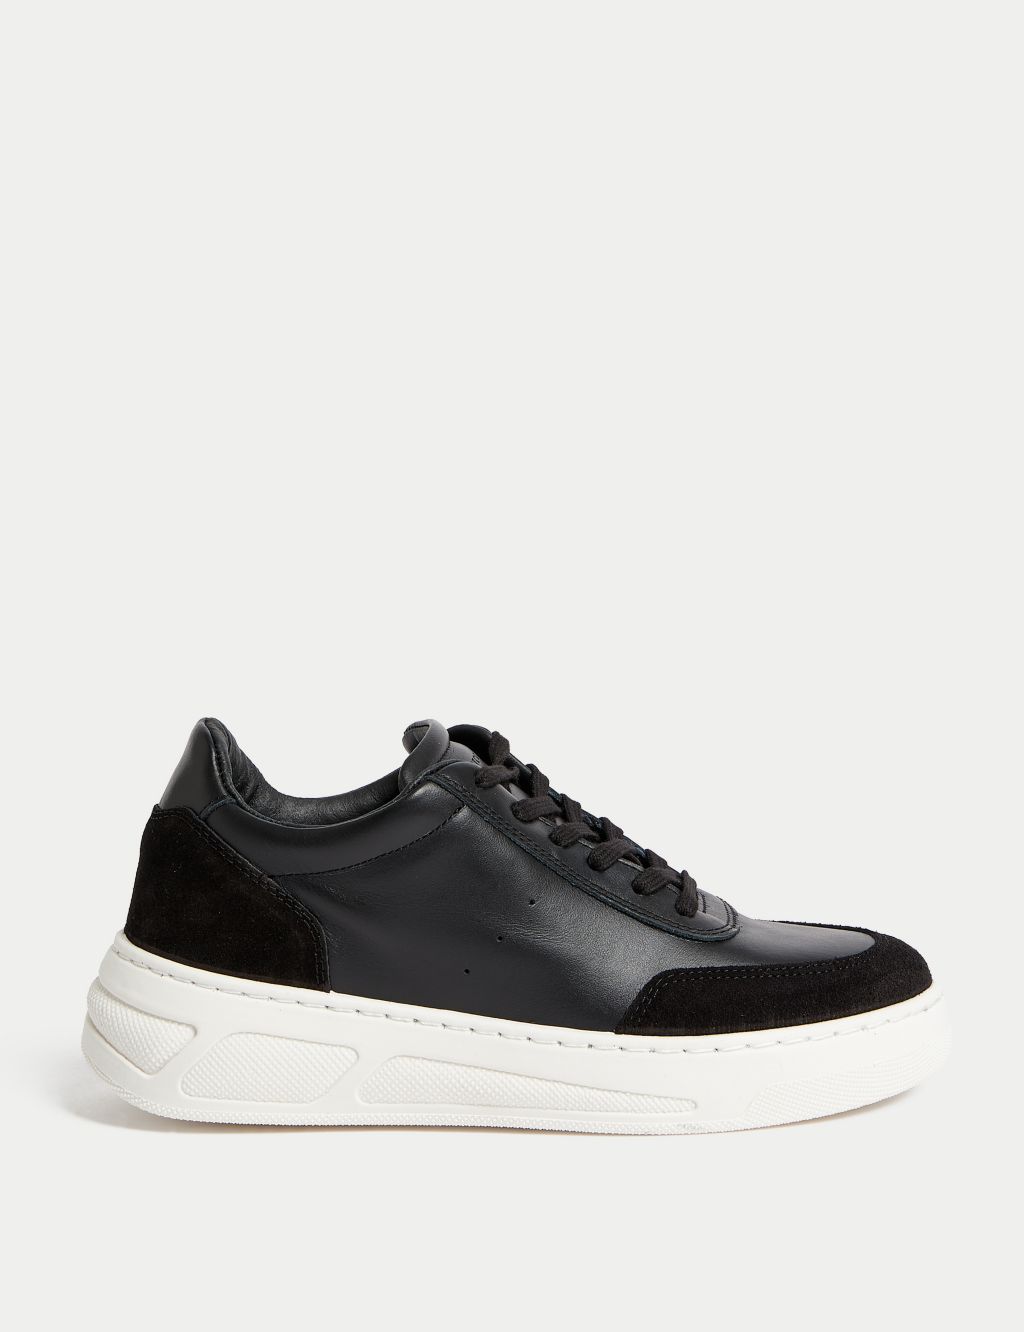 Leather Lace Up Platform Trainers image 1